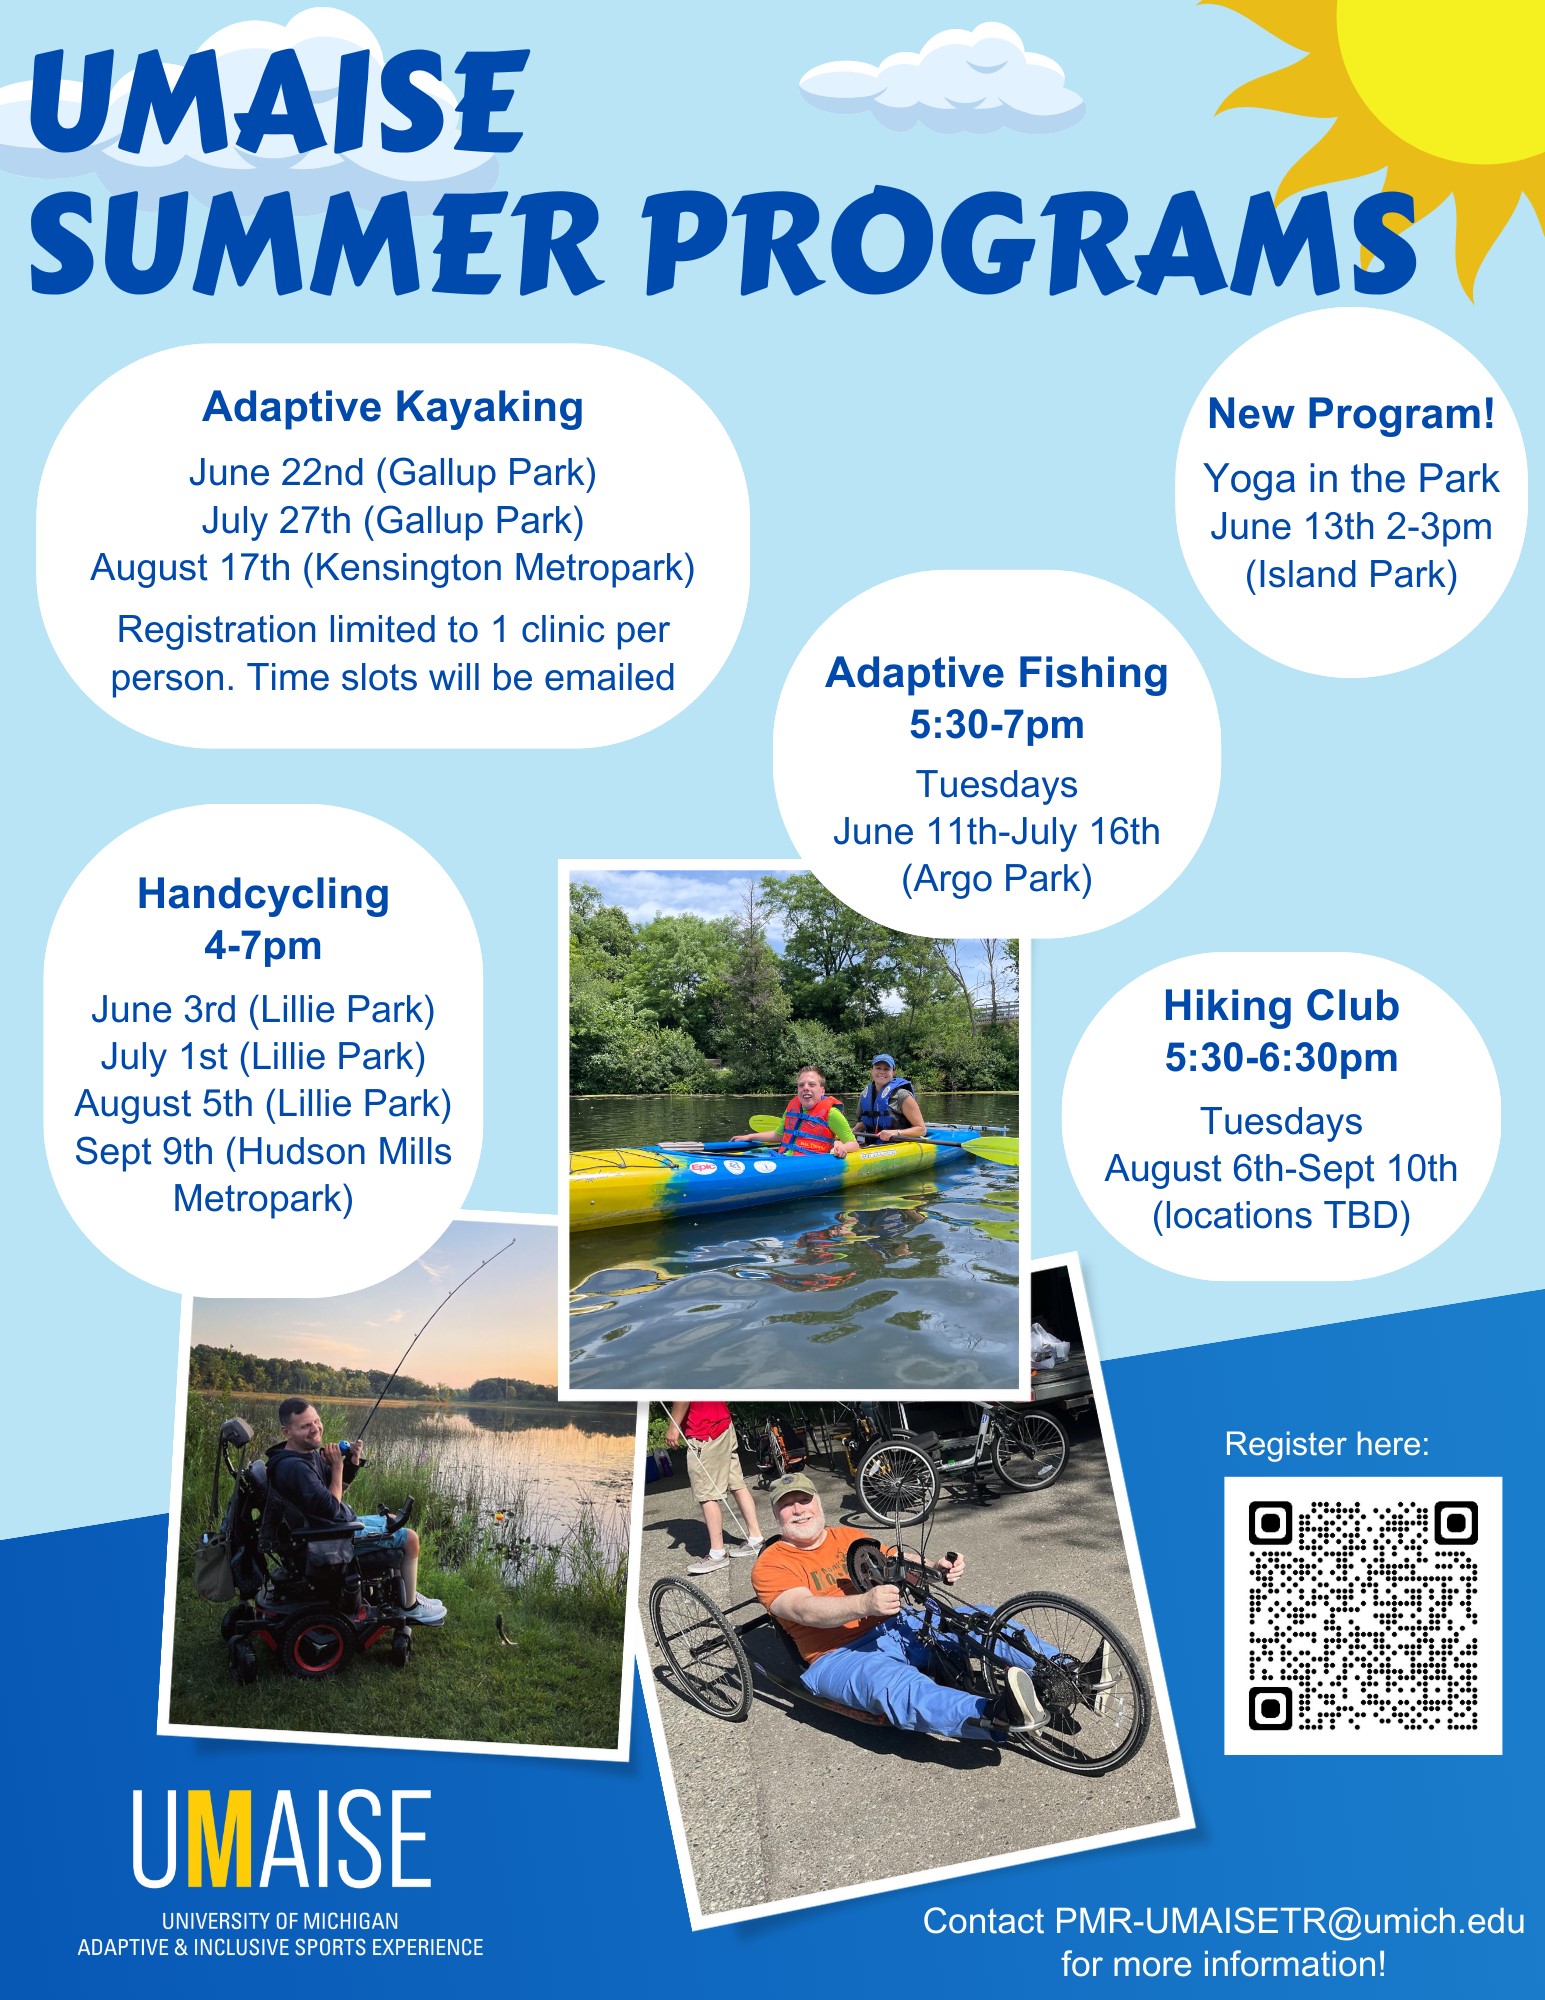 Flyer describing the summer 2024 UMAISE programs. For details go to https://medicine.umich.edu/dept/pmr/patient-care/therapeutic-other-services/umaise-university-michigan-adaptive-inclusive-sports-experience/offered-programs